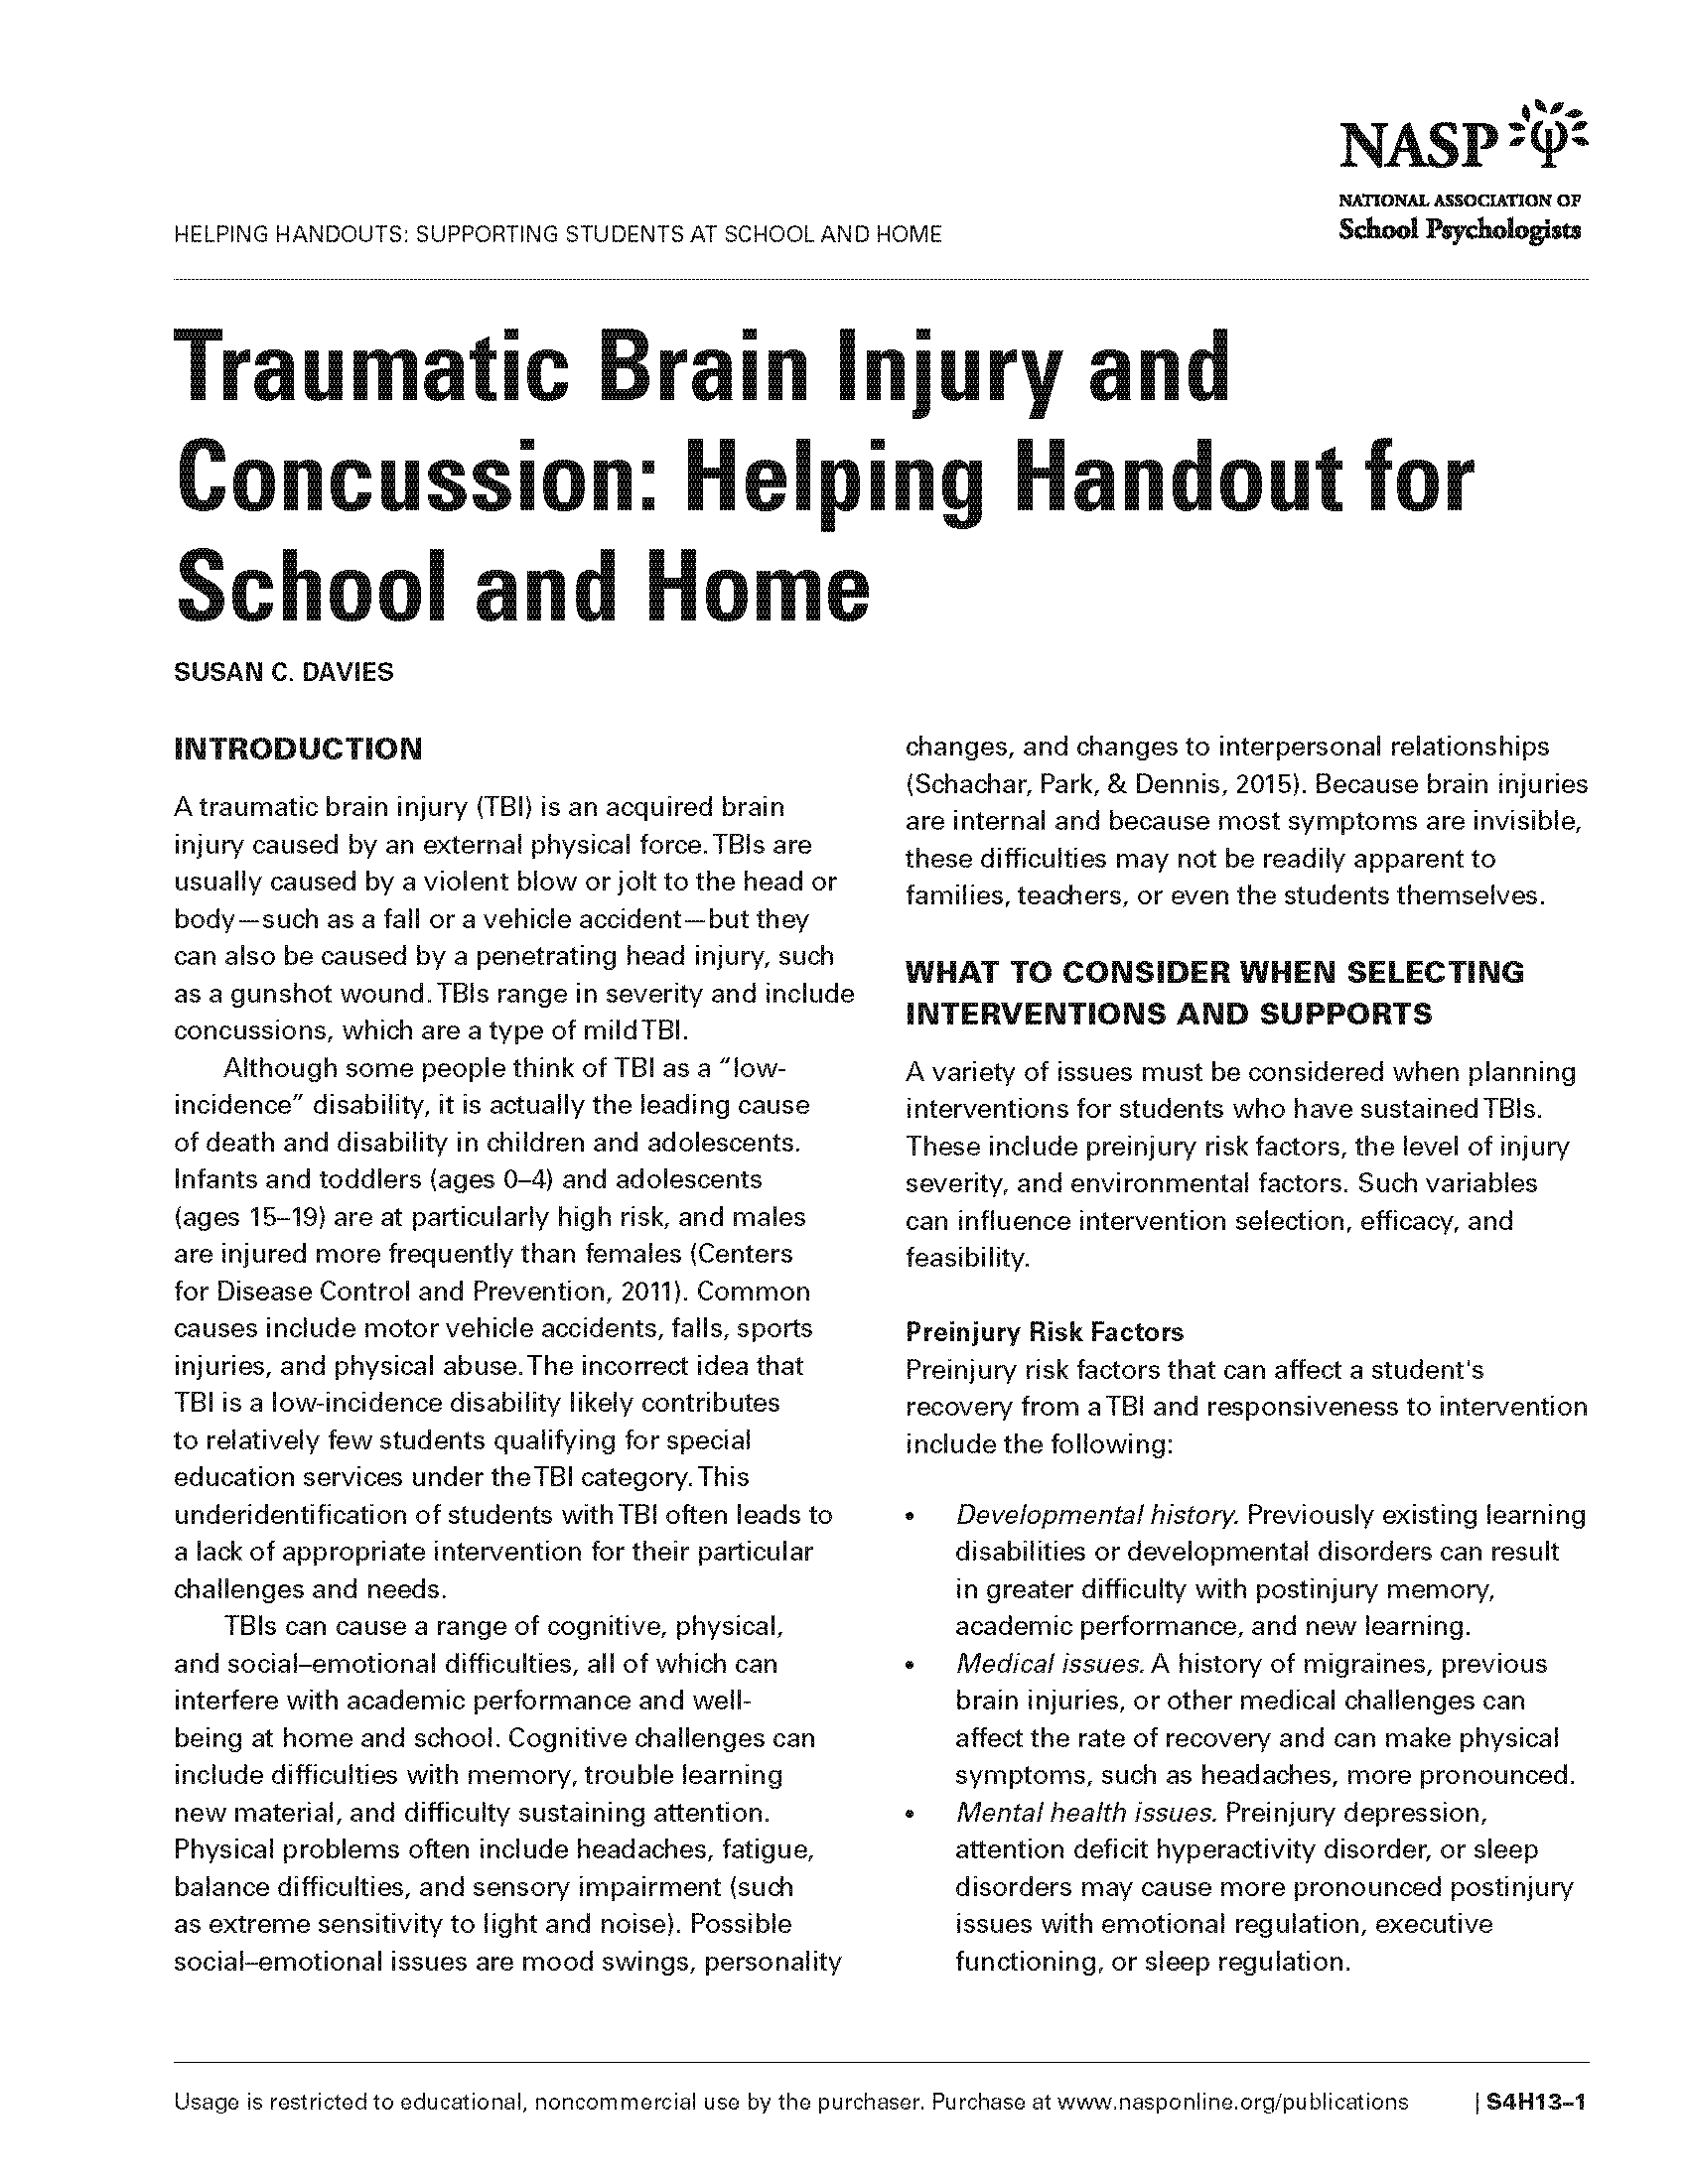 Traumatic Brain Injury and Concussions: Helping Handout for School and Home